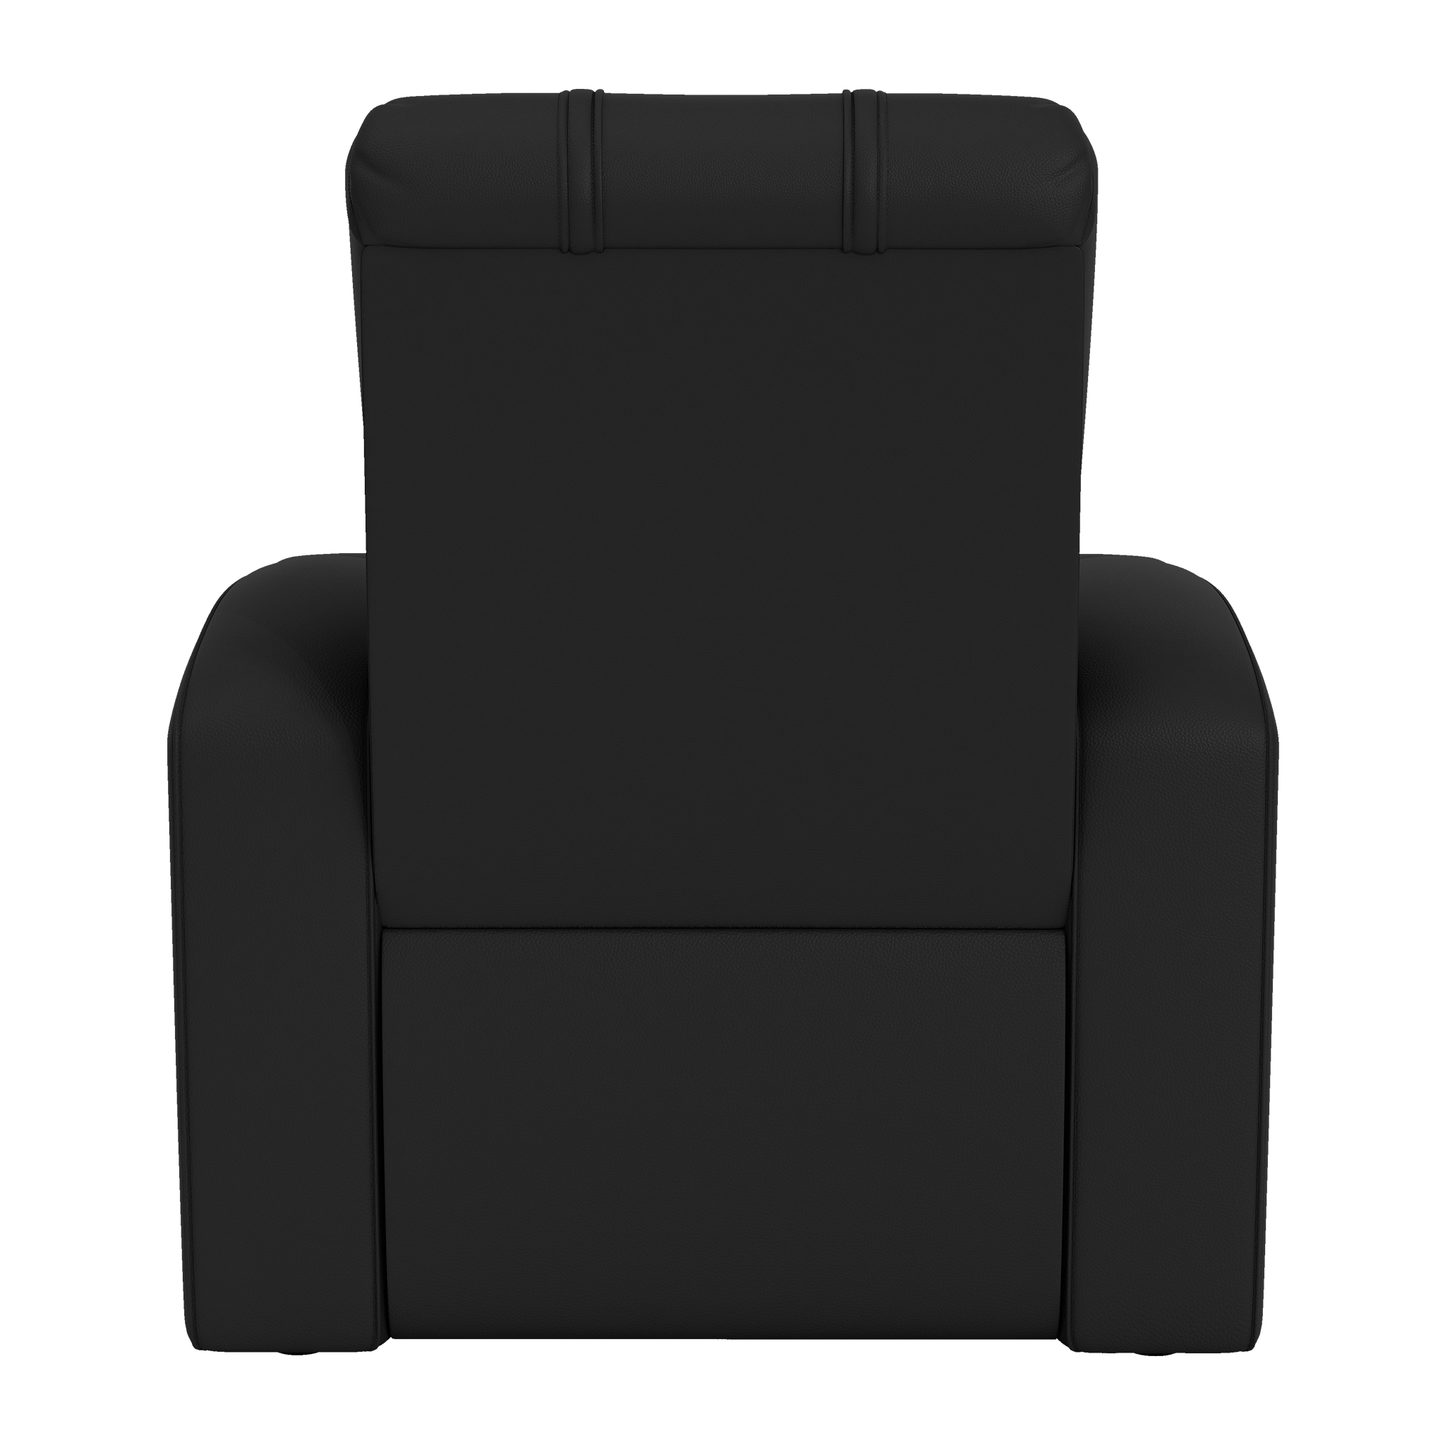 Relax Home Theater Recliner with Iowa Hawkeyes Block I Logo